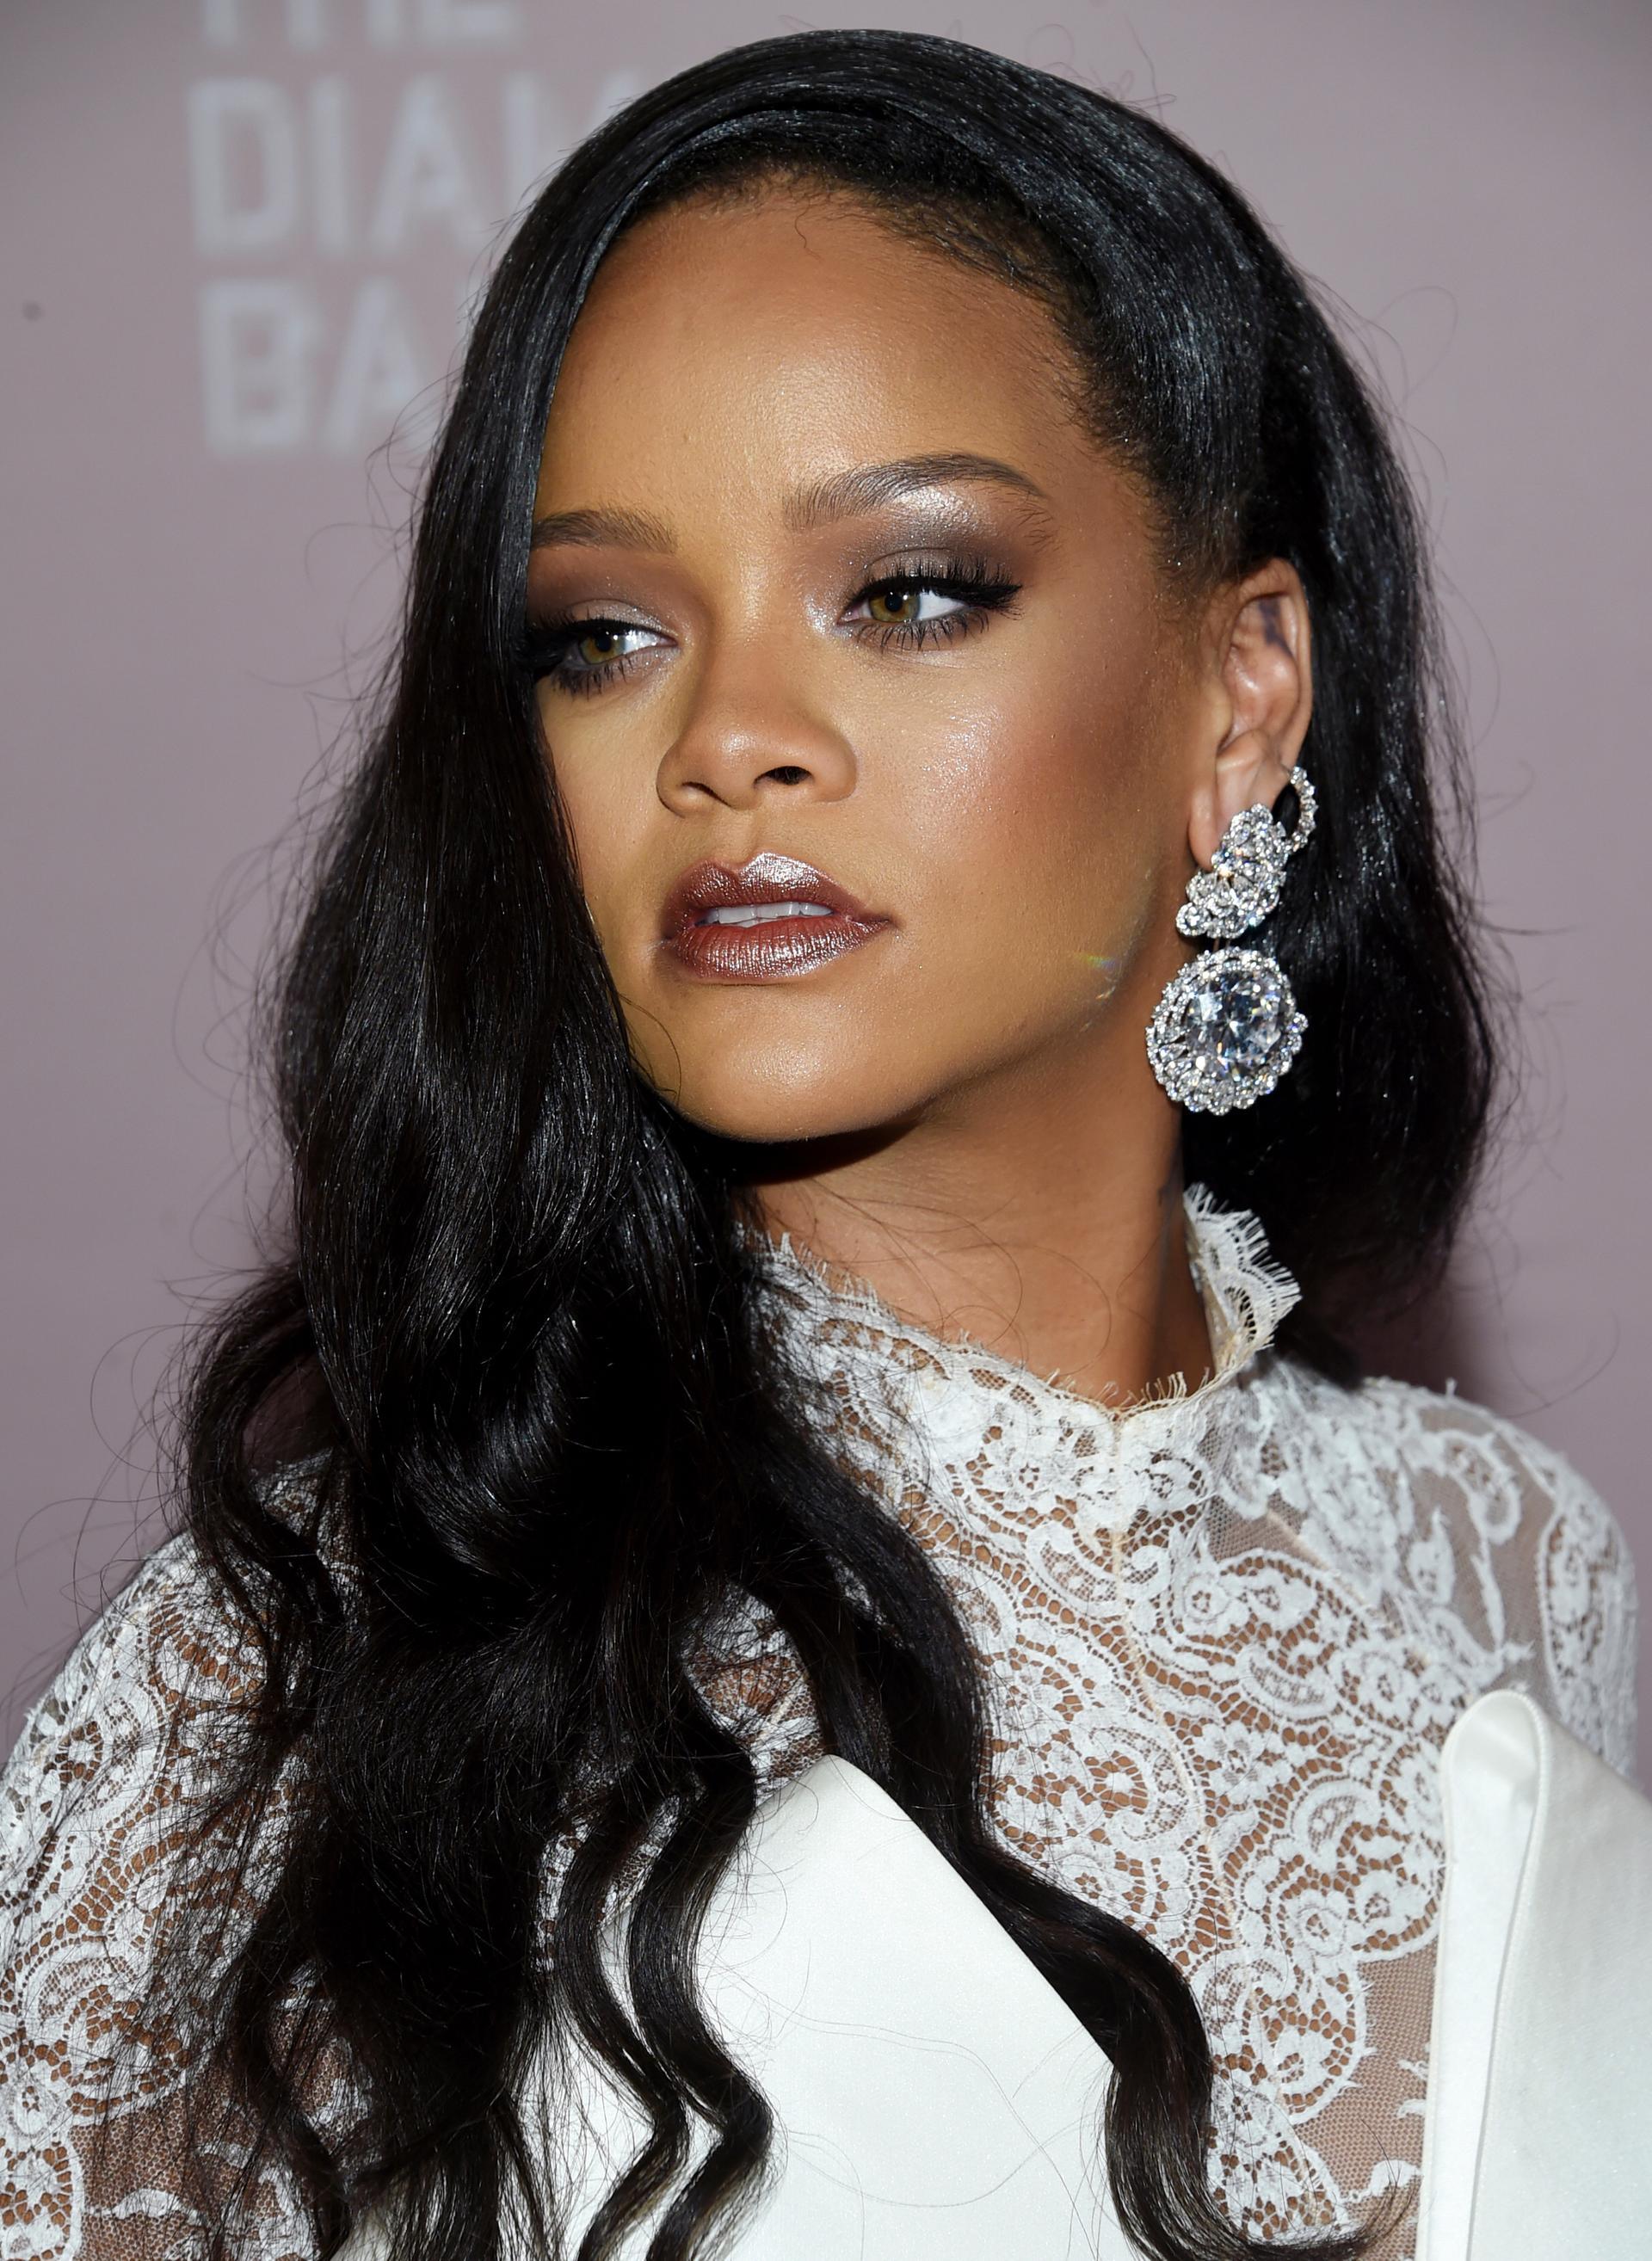 Rihanna Reportedly Working With LVMH to Launch Own High-End